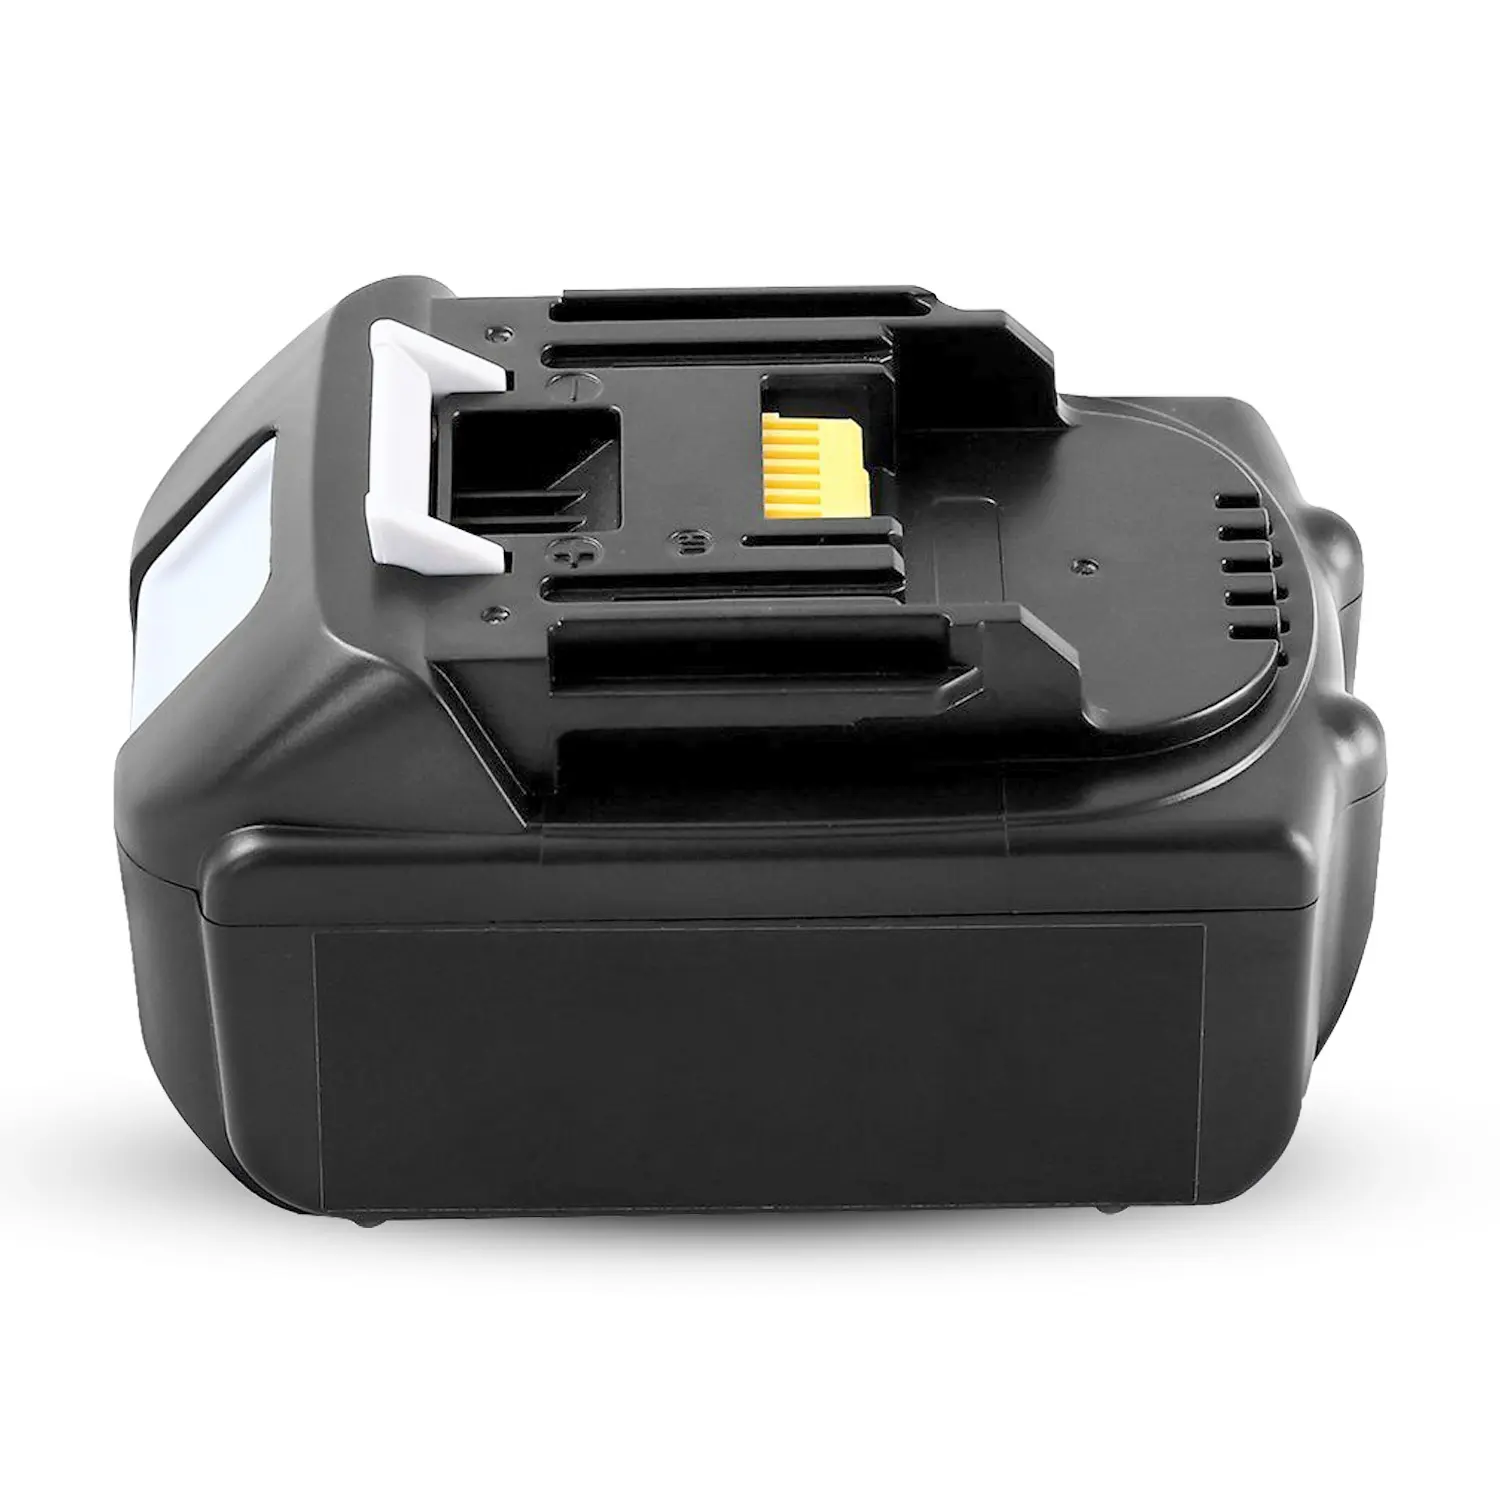 2022 Hot Sell Replacement Makita Battery Power Tool Battery BL1860 BL1850 for Makita 18V lithium ion Batteries 6.0Ah